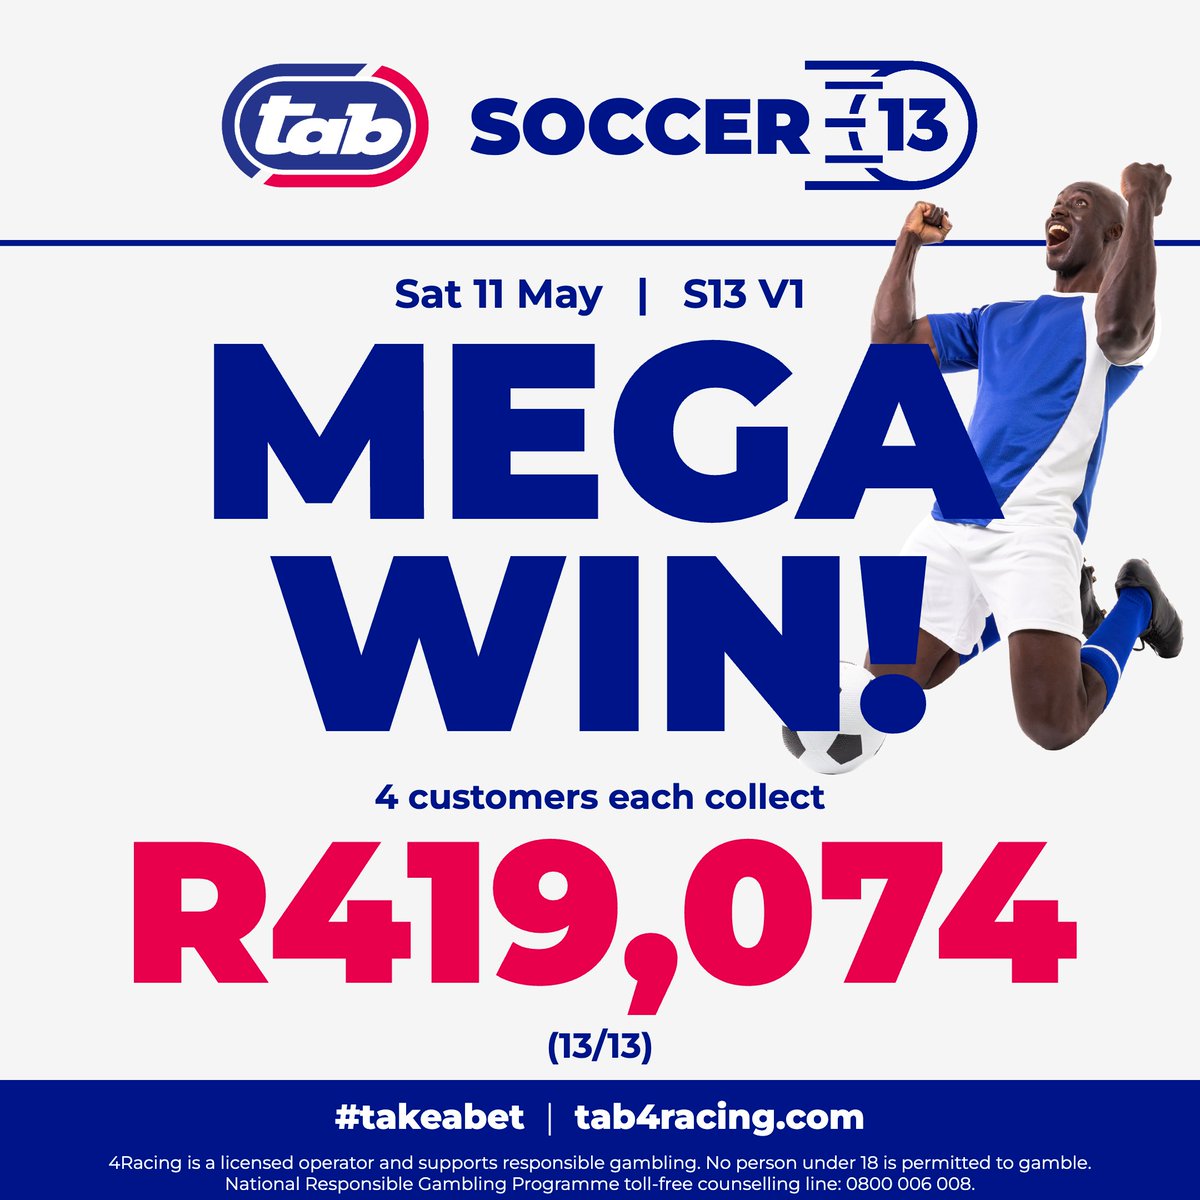 🌟 Mega Win Alert! 🌟 We're thrilled to announce that on Saturday, 11th May, four lucky players scored big with Soccer13 V1, each taking home a whopping R419,074! 🎉⚽️ Congratulations to our winners! Could you be next? Don't miss out on the action! #Soccer13 #MEGAWIN #TAB